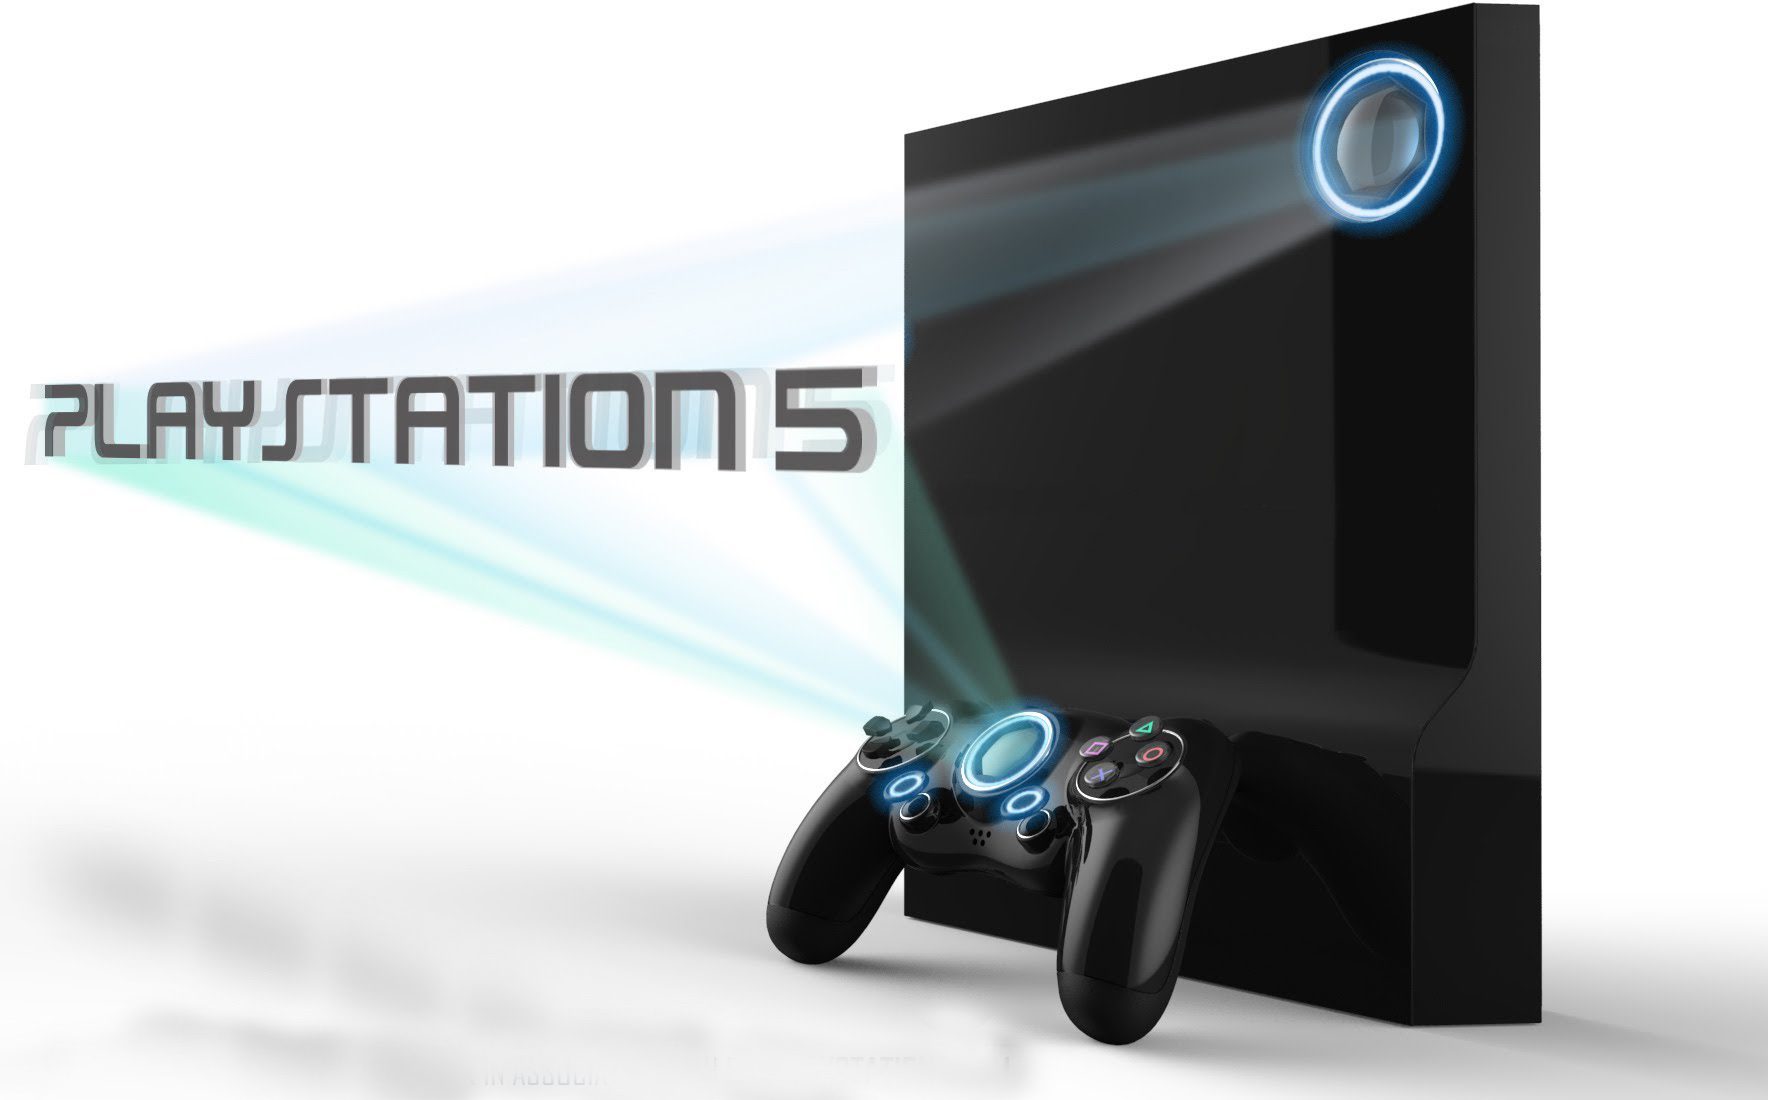 Sony PLAYSTATION 5. Ps5 Concept 2015. Sony PLAYSTATION 5 игры. PLAYSTATION 5 картинки. Какие игры на ps 5